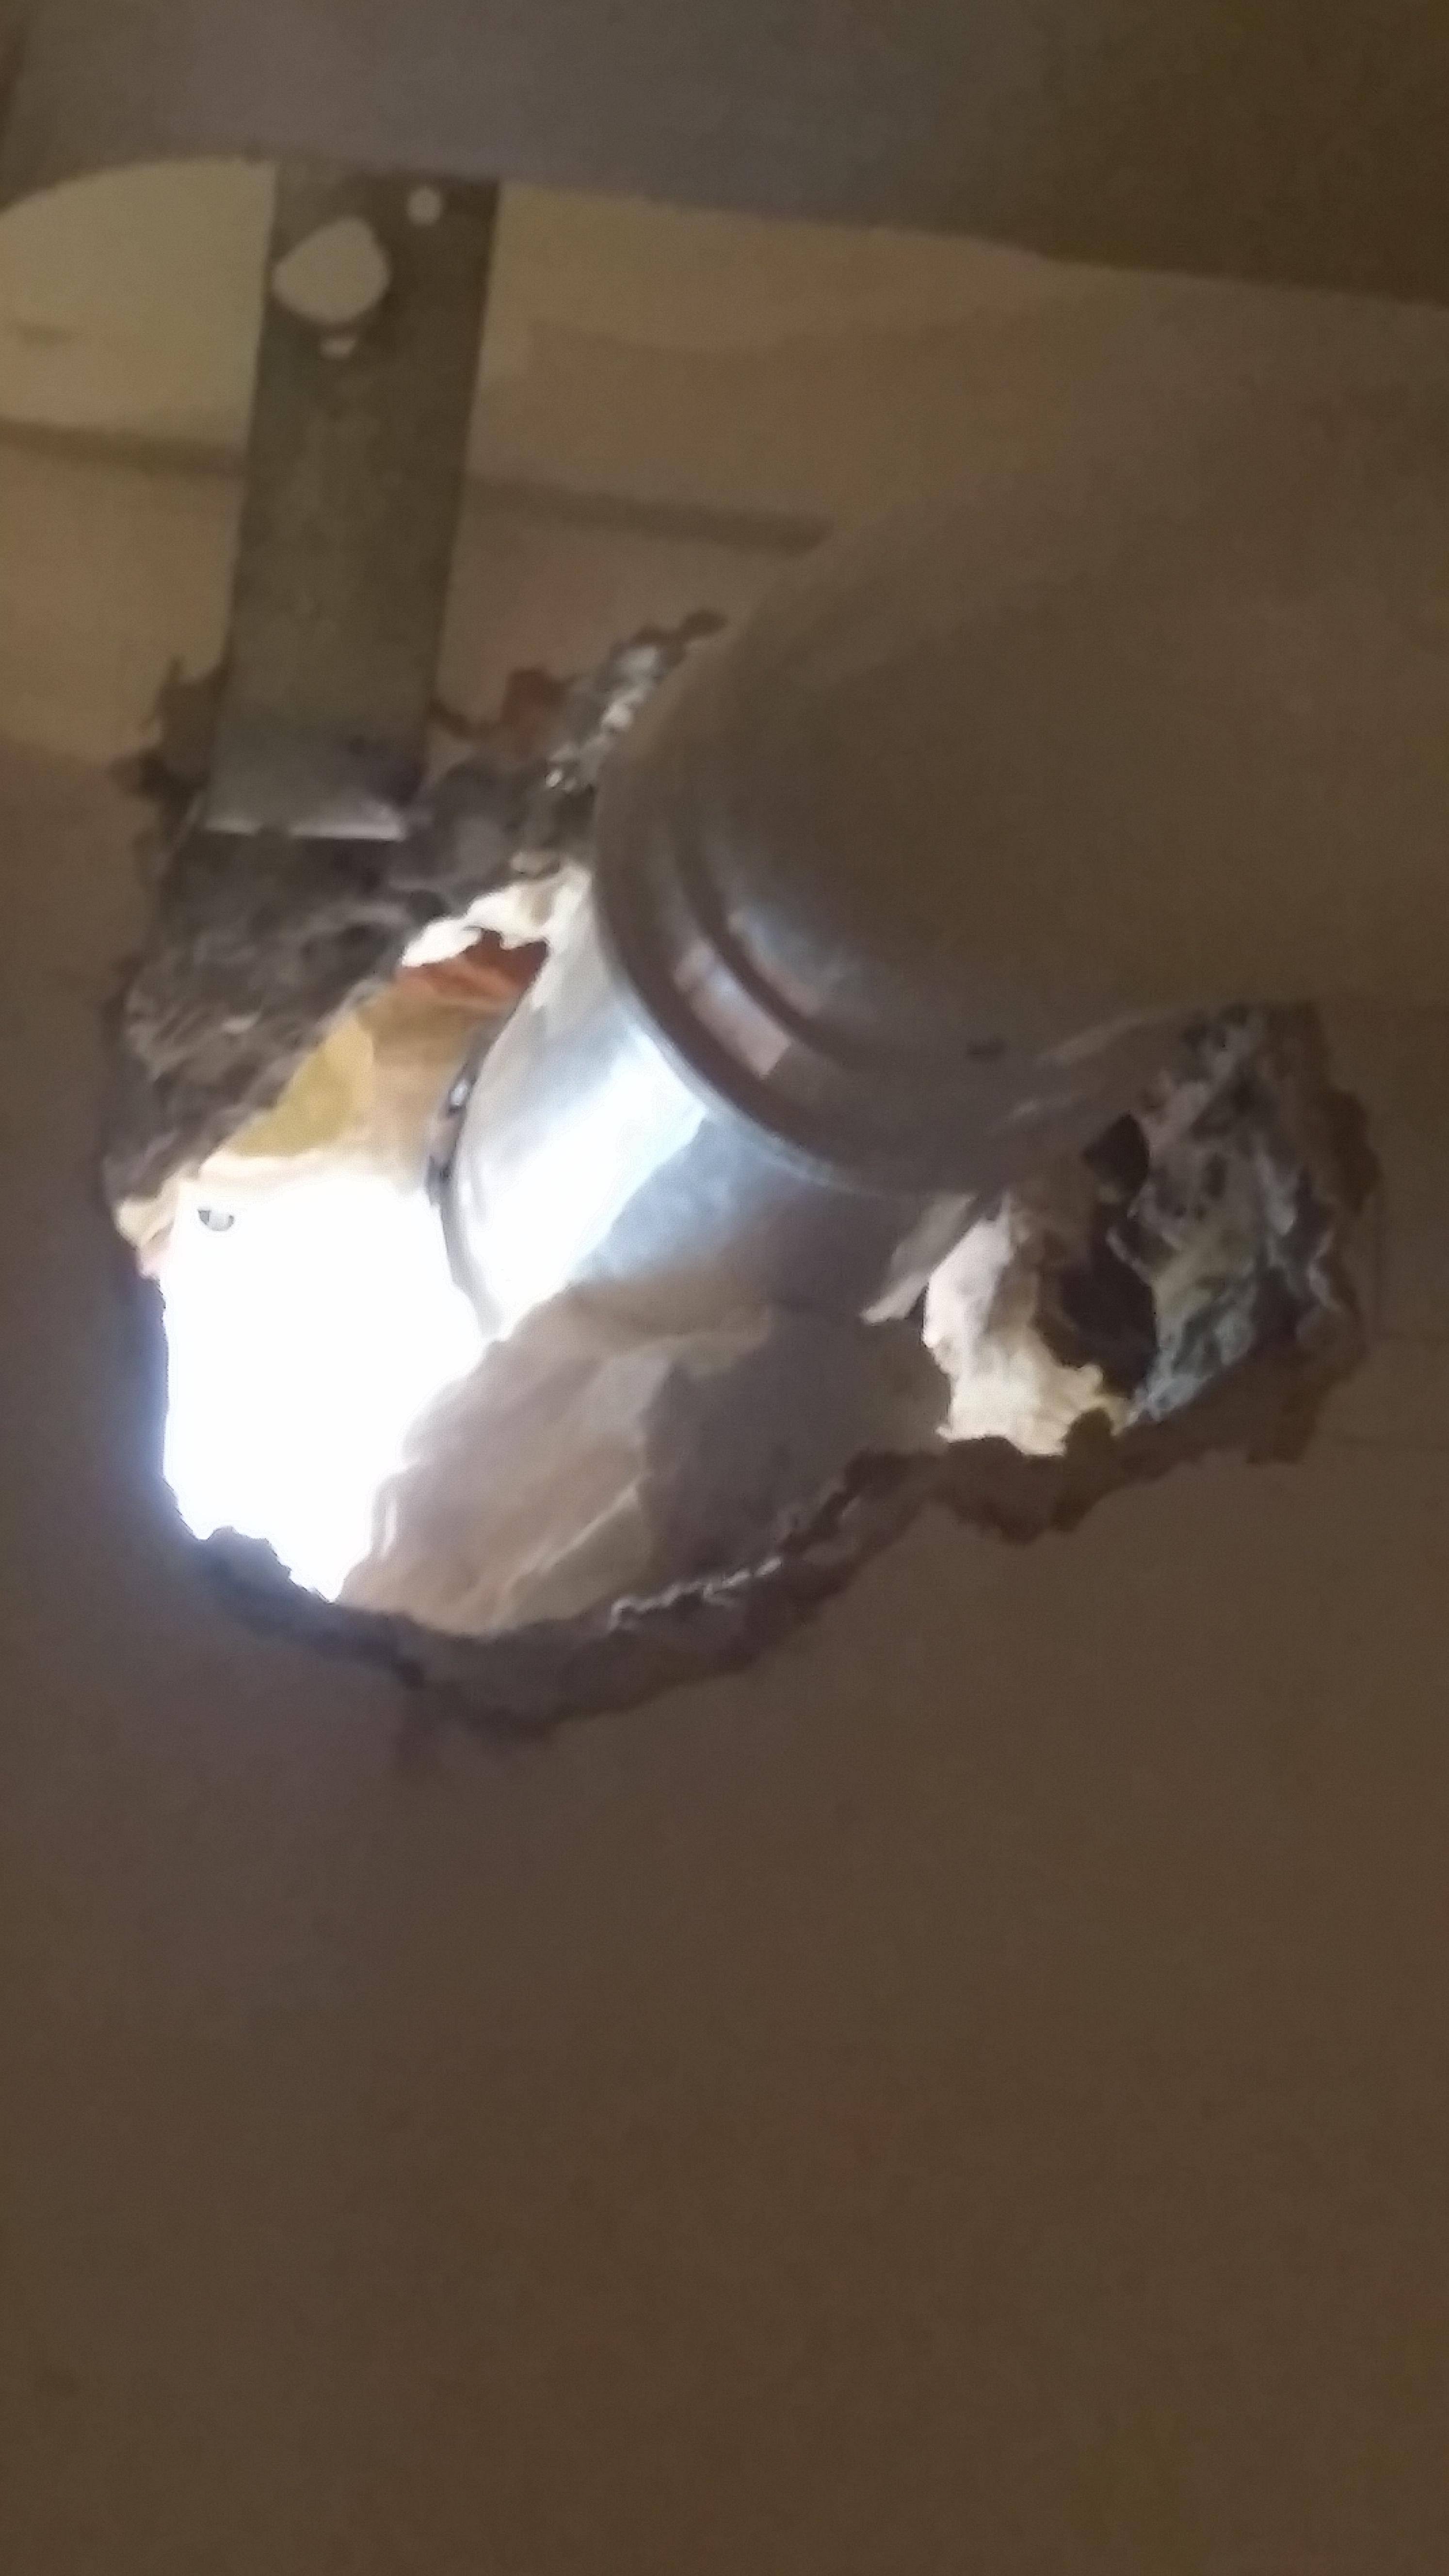 This hole was found in a cuboard. Fix it before you book your air tightness test.